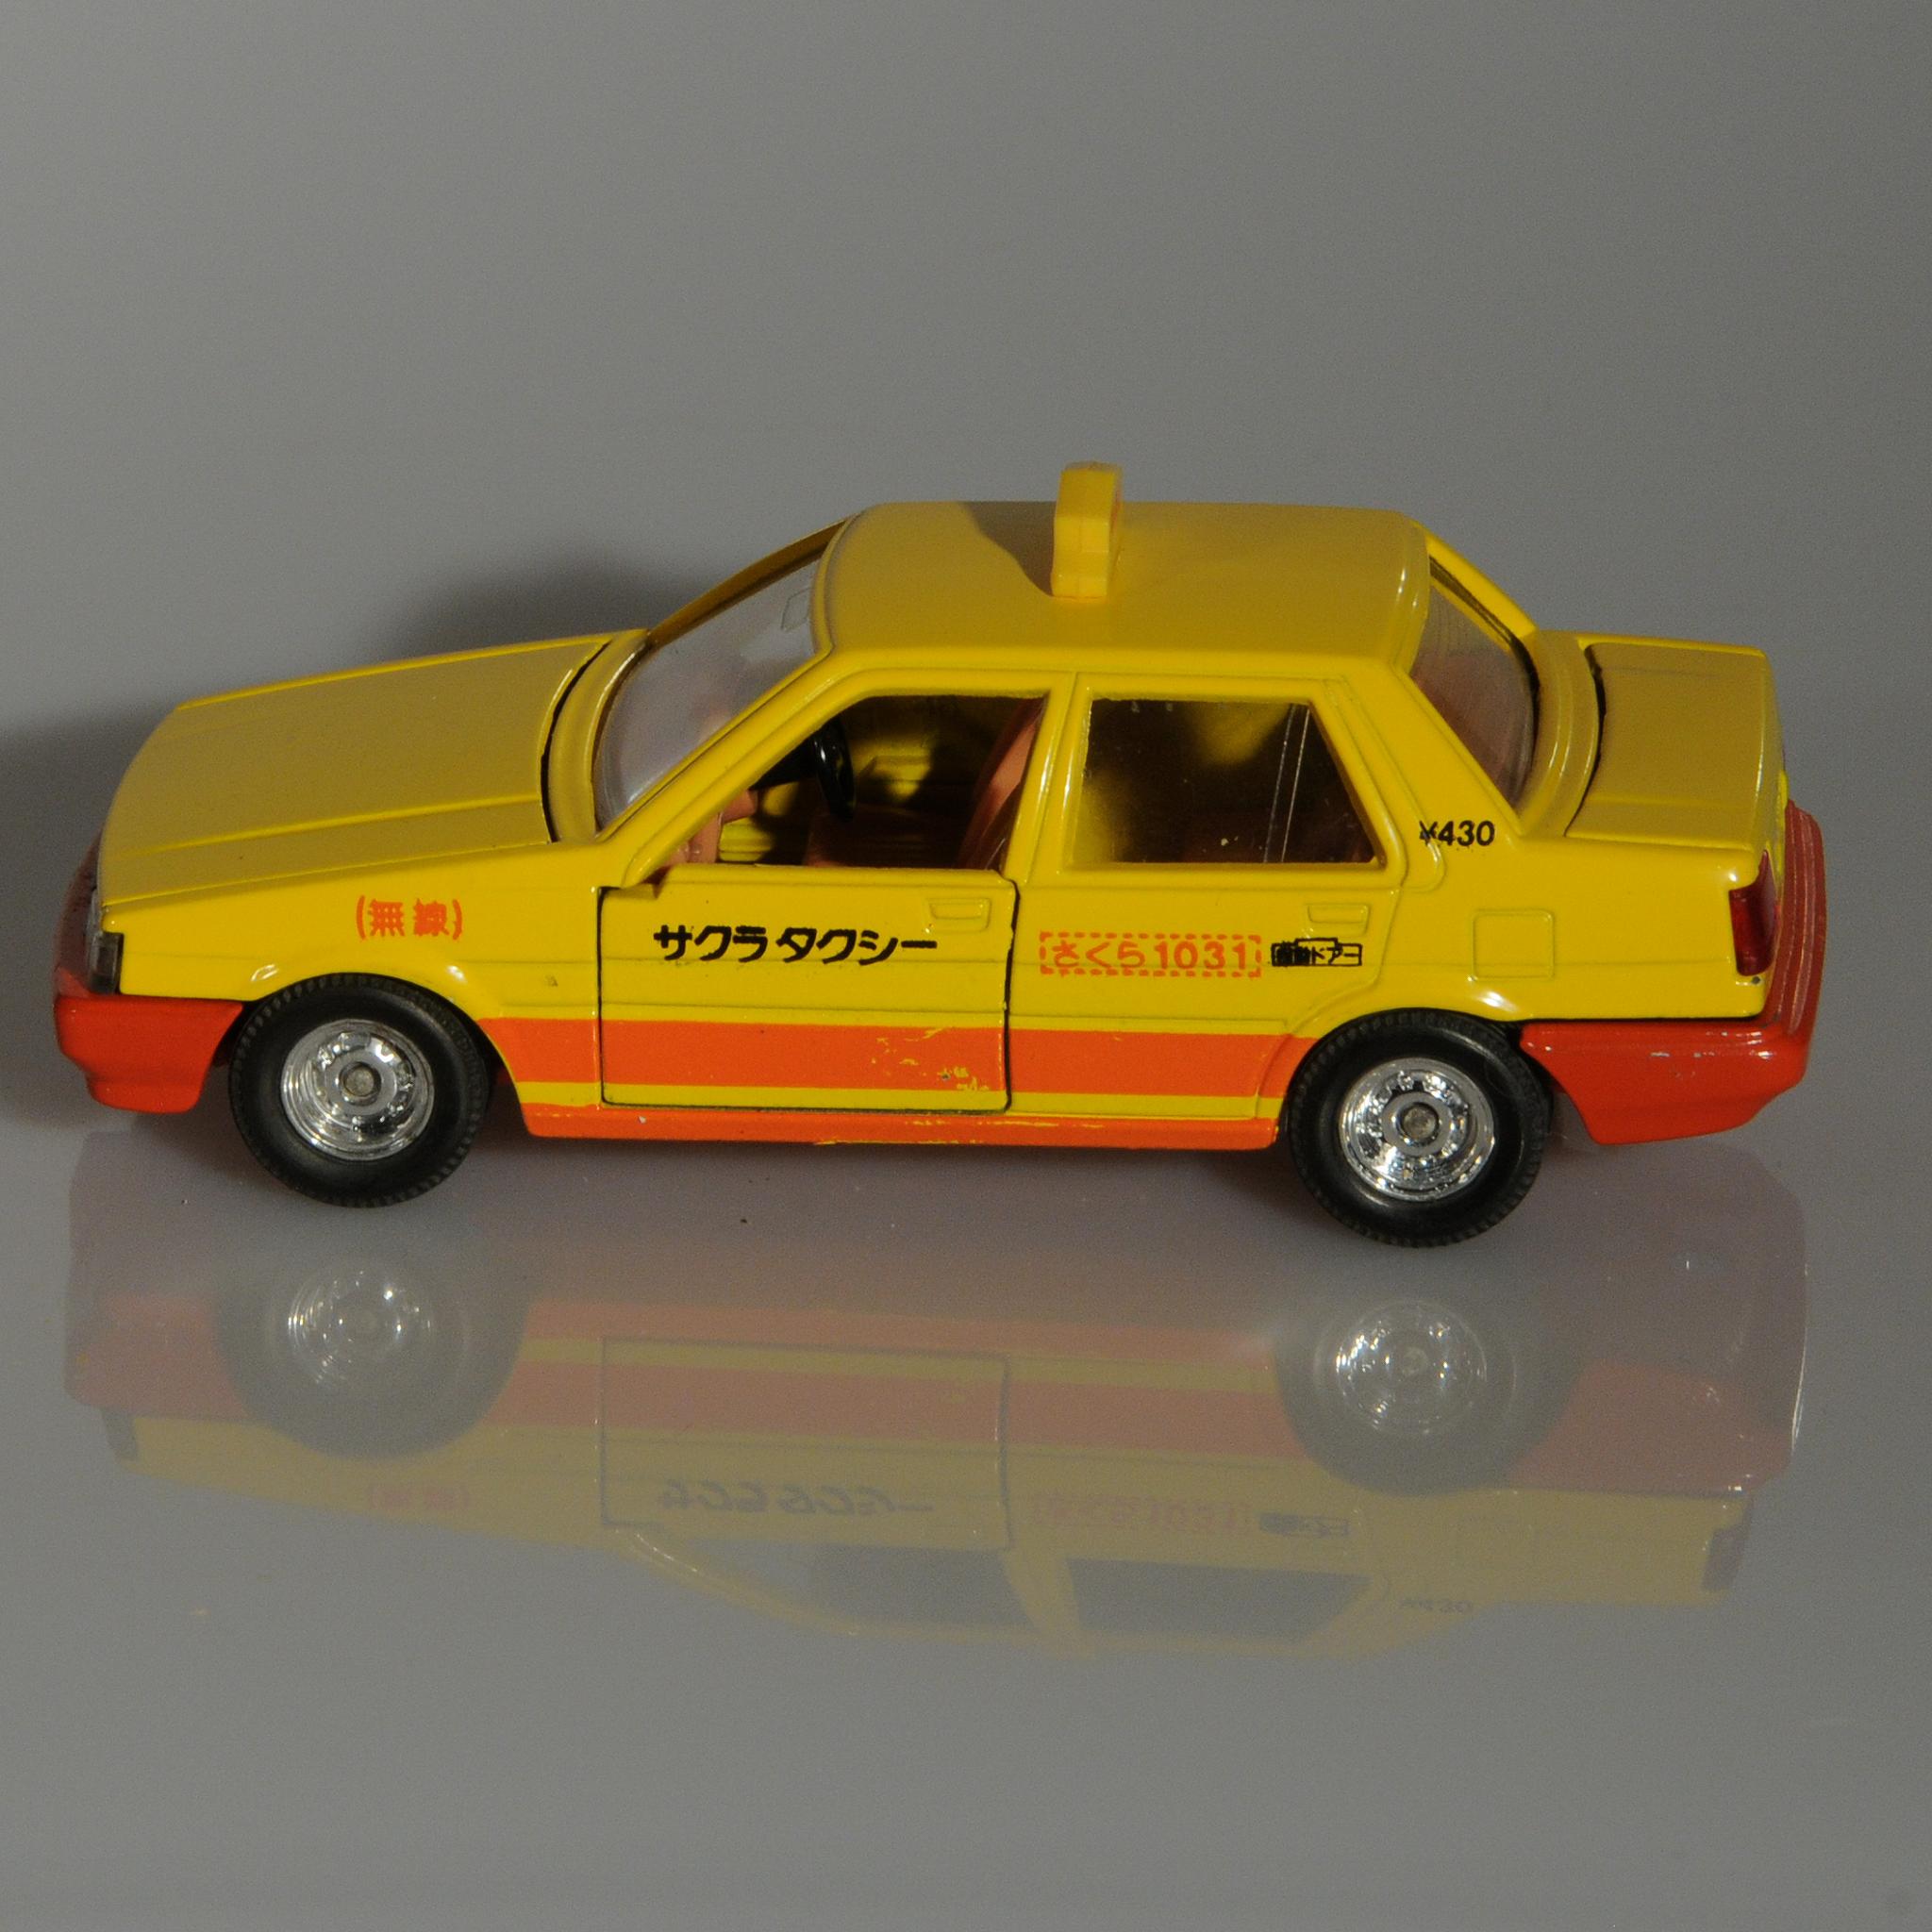 Tomica+Toyota+Corolla+Taxi+Diecast+Model+from+Japan+1%3A43 picture 3